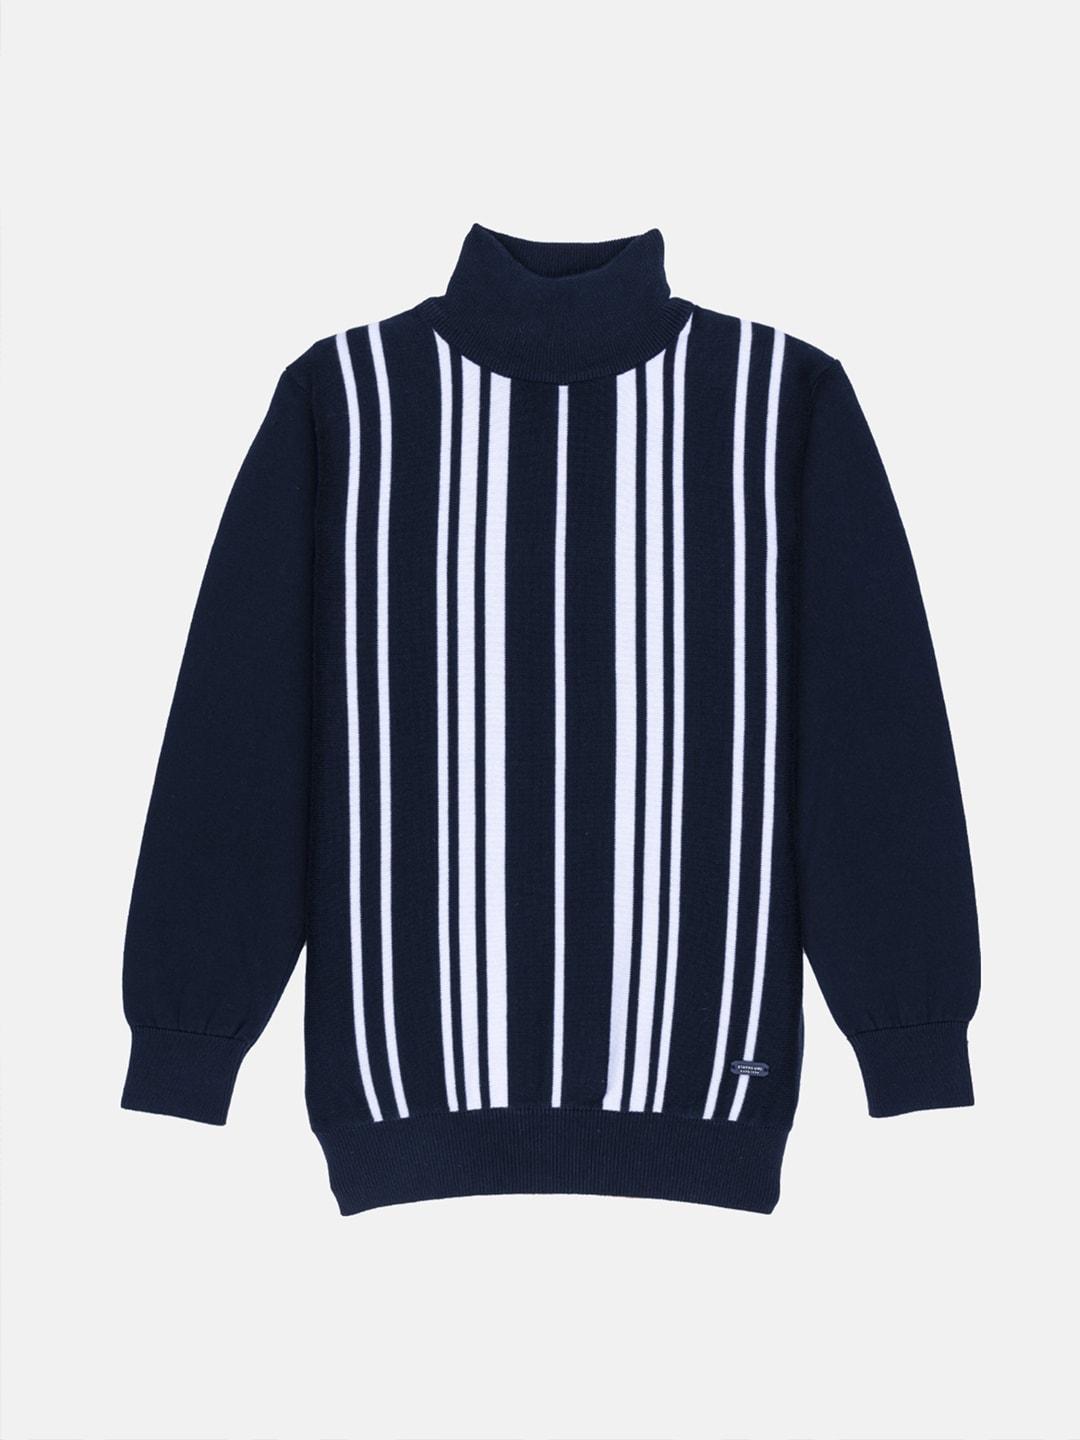 Status Quo Boys Navy Blue & White Striped Pullover Sweater